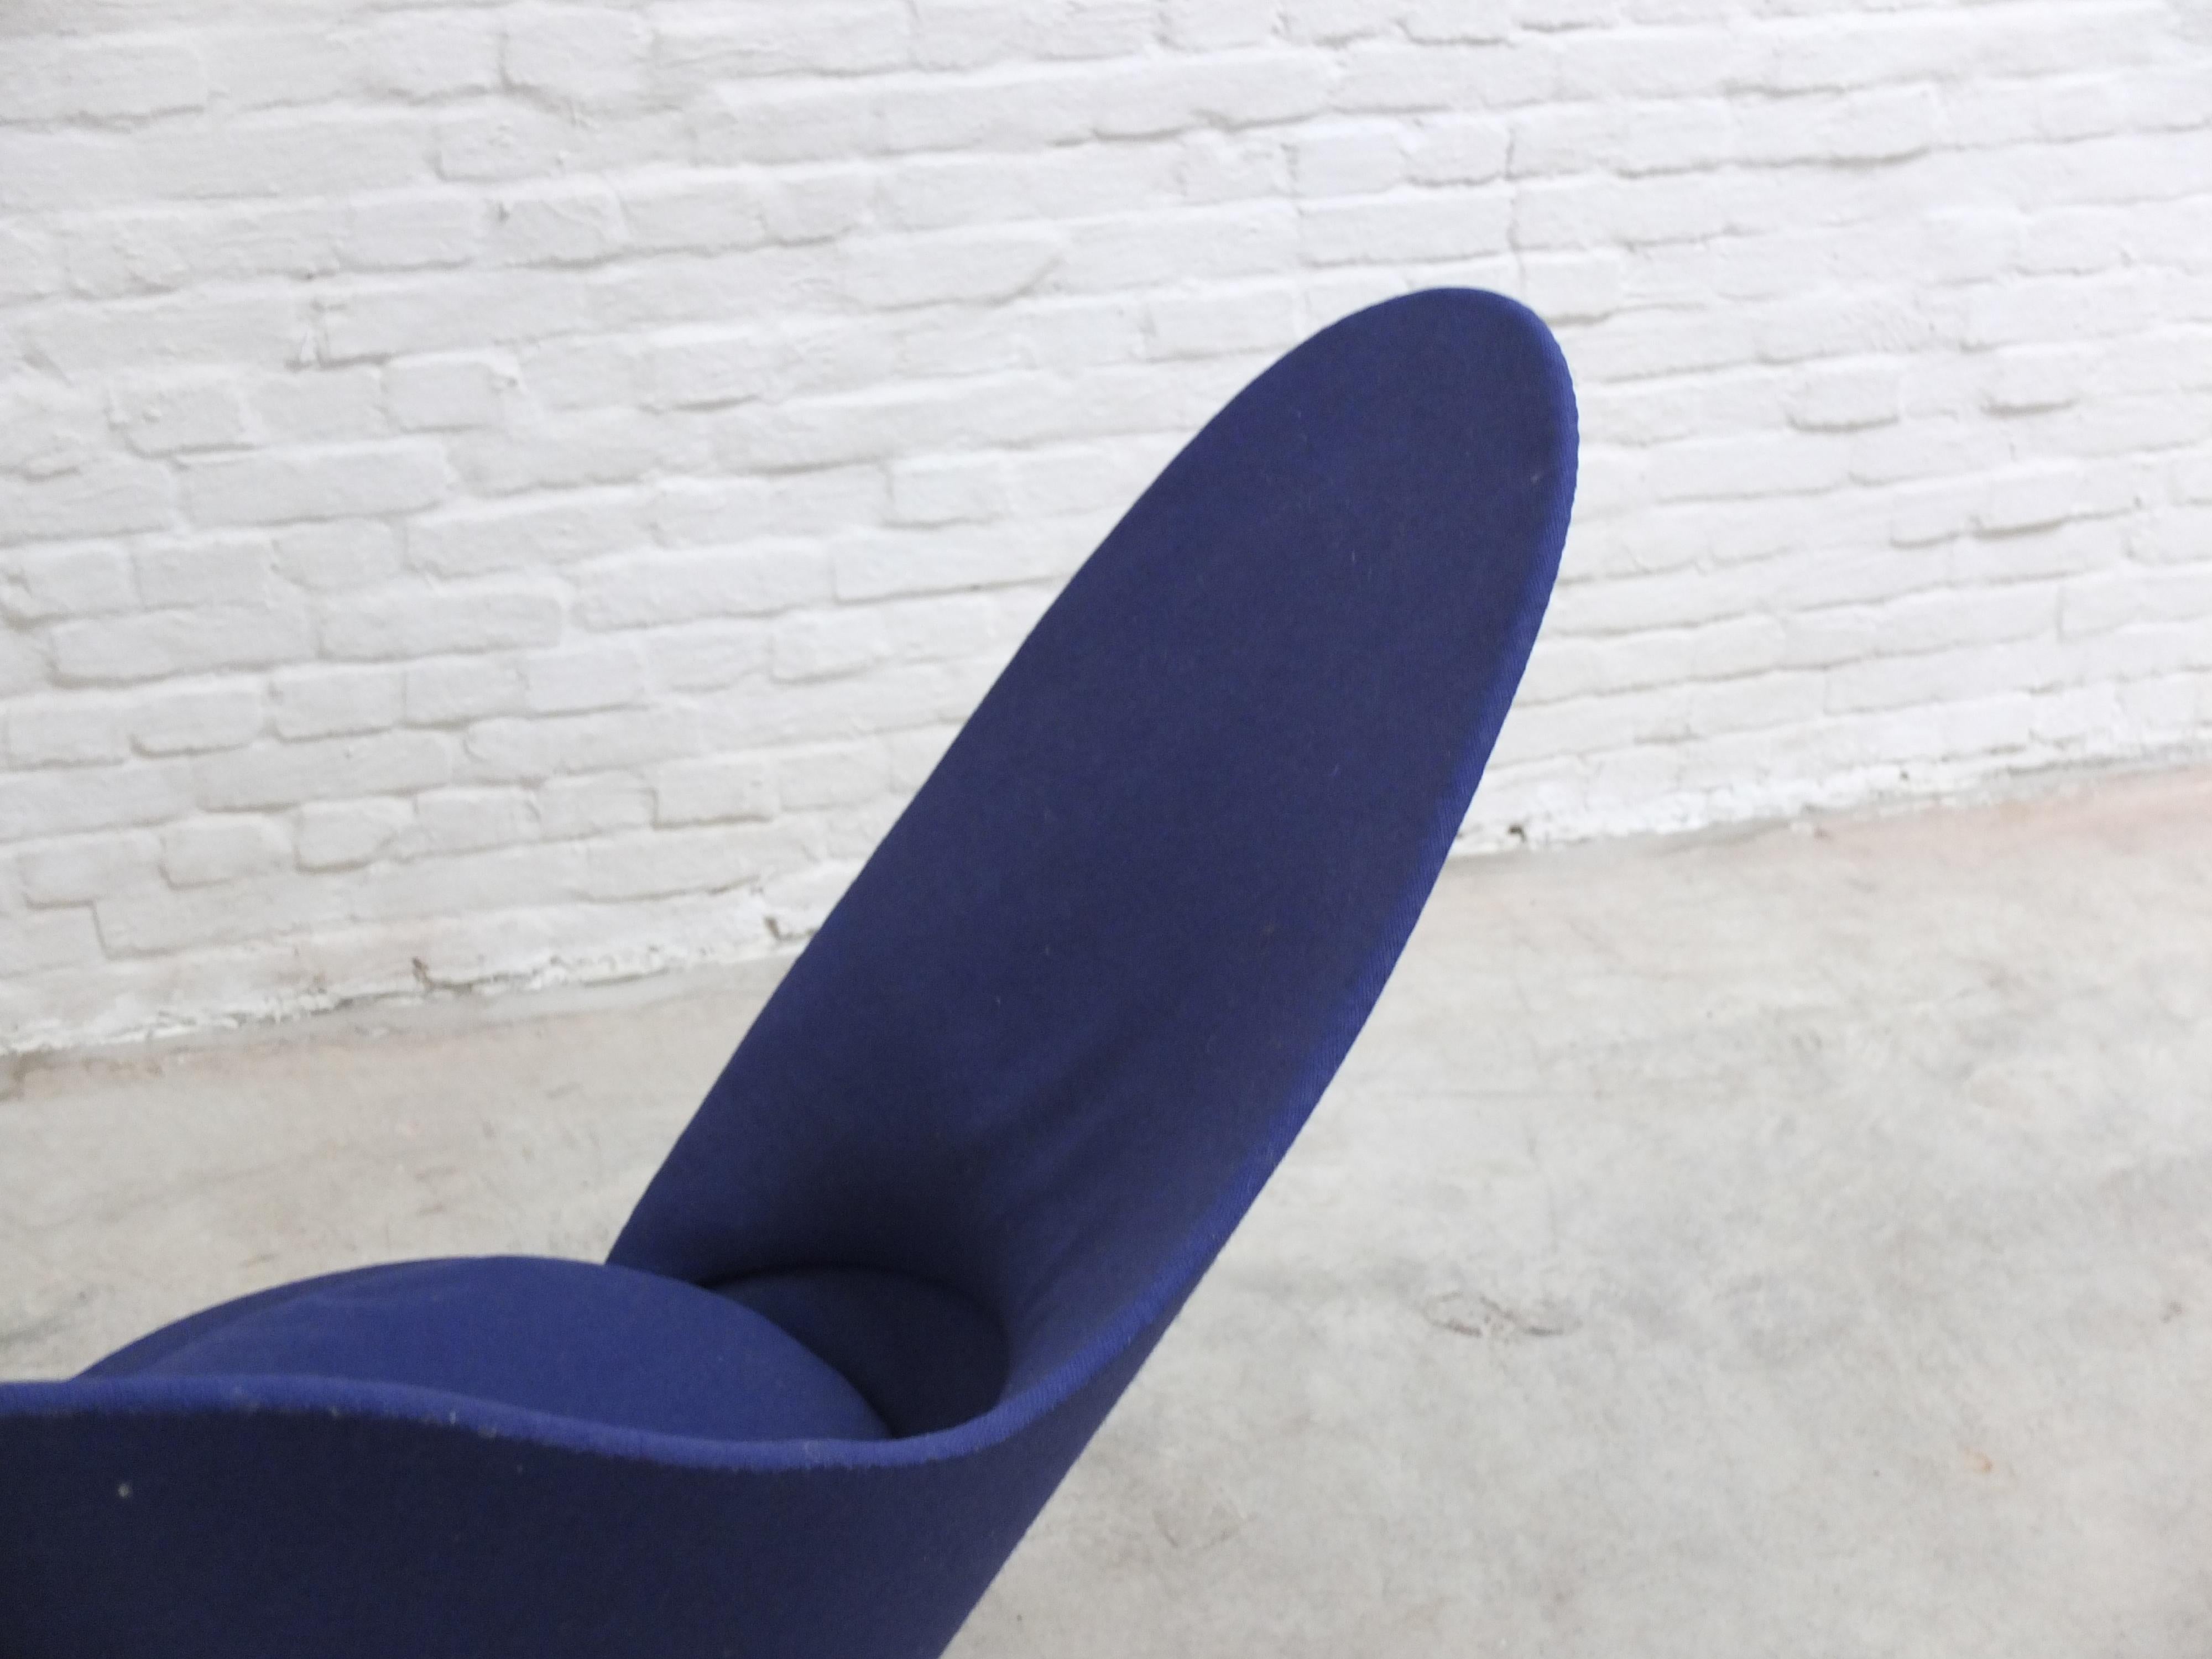 Iconic 'Heart Cone' Chair by Verner Panton for Plus Linje, 1958 For Sale 8